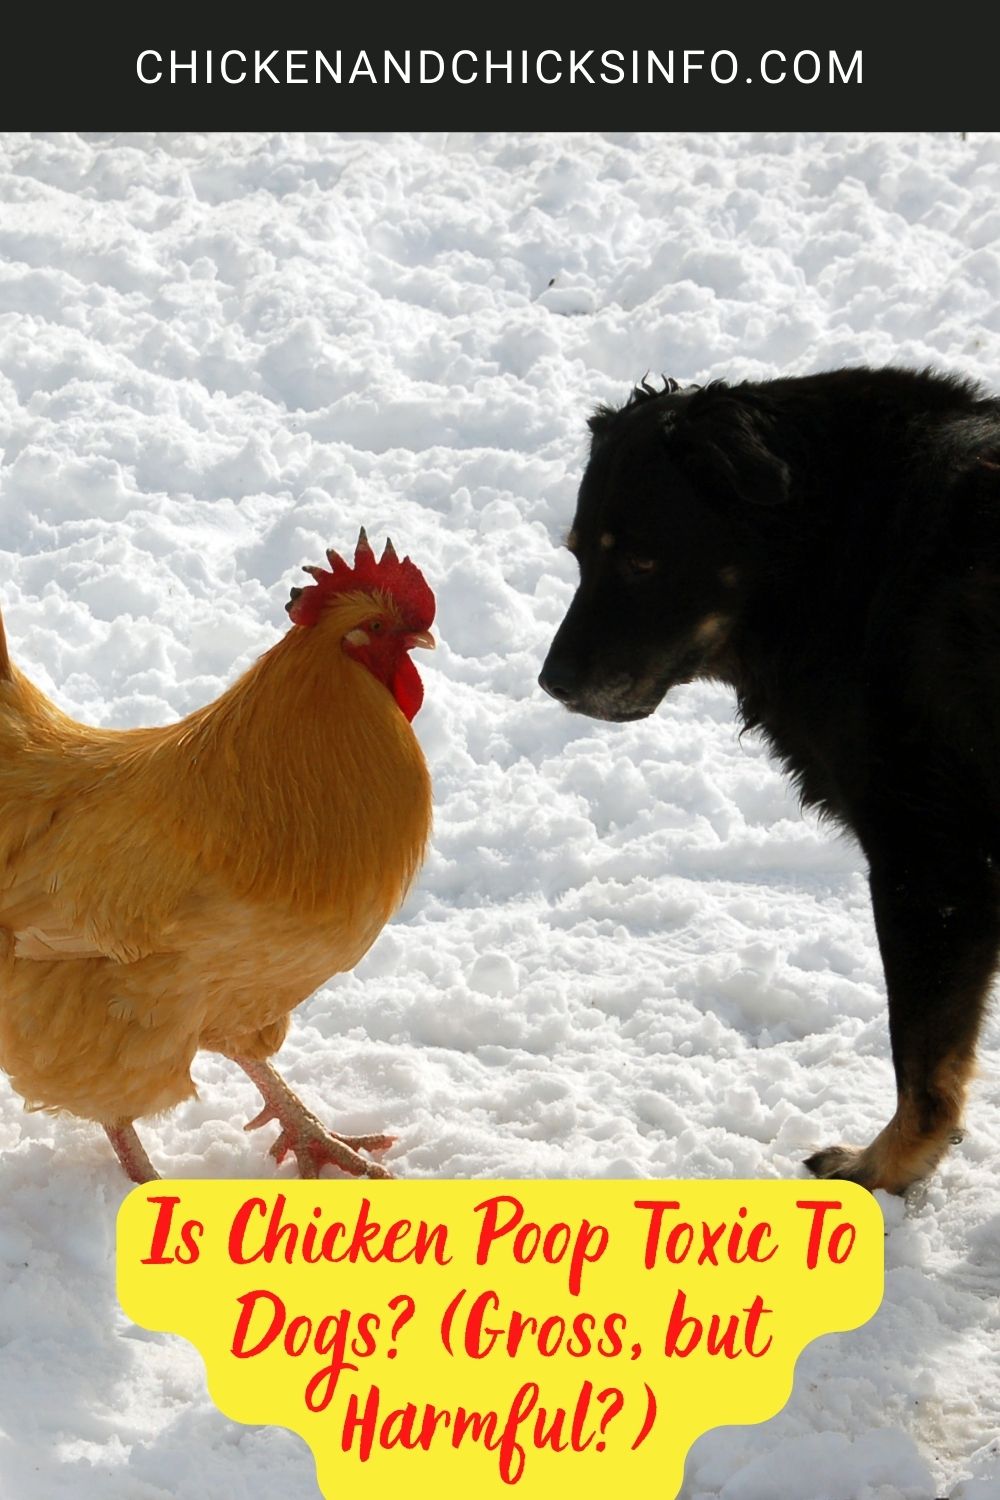 Is Chicken Poop Toxic To Dogs? (Gross, but Harmful?) poster.
